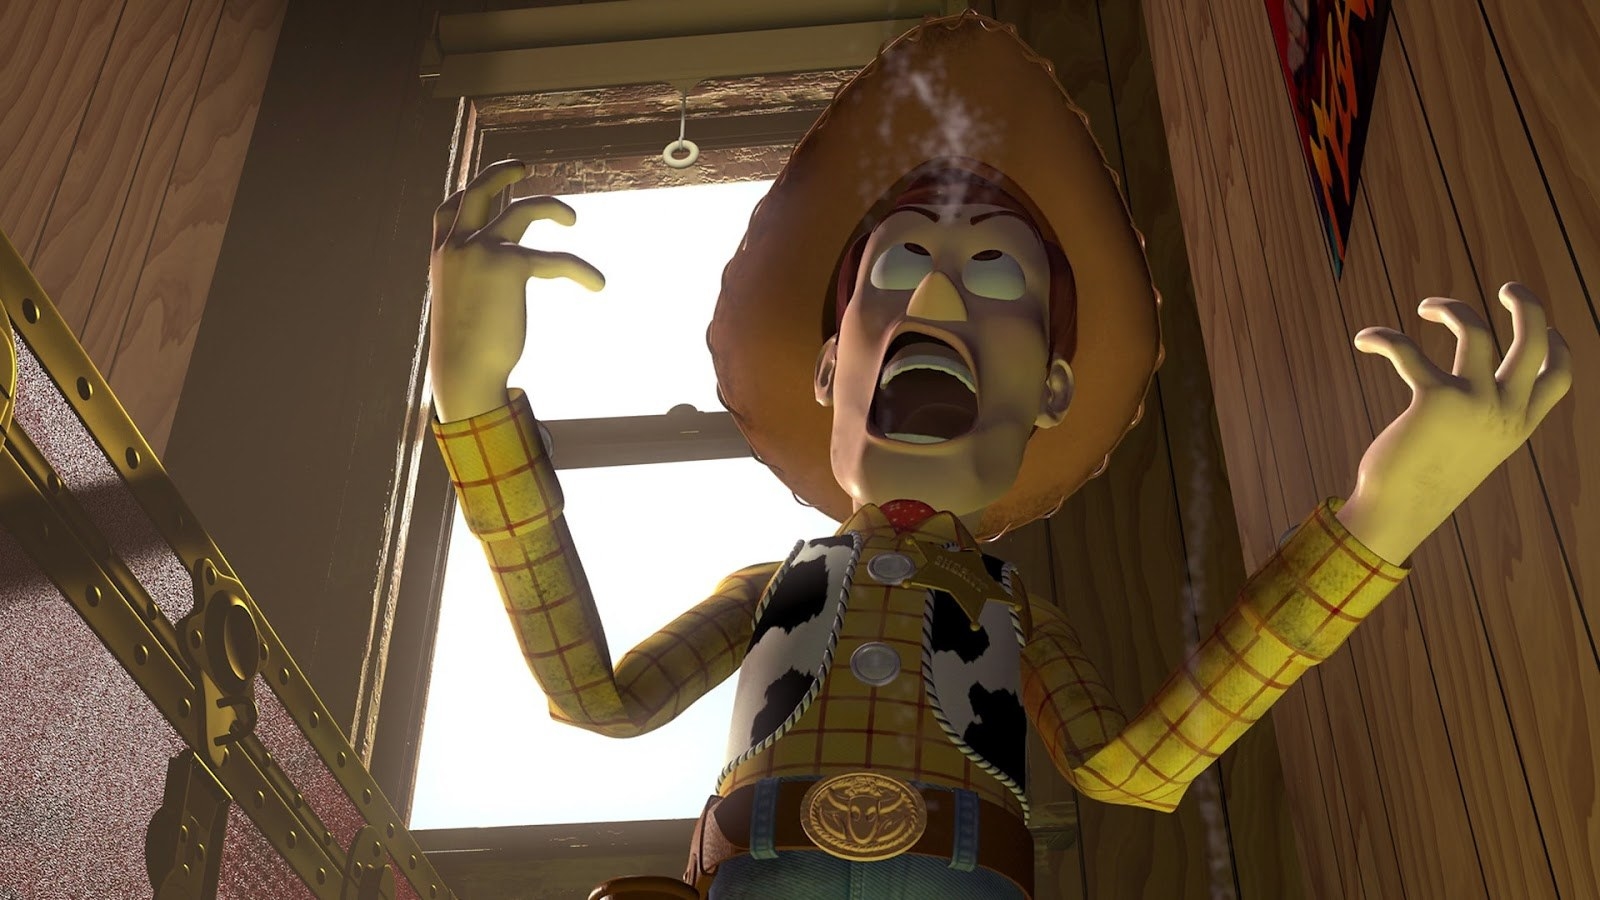 18 Toy Story Moments That Were Actually Made For Adults